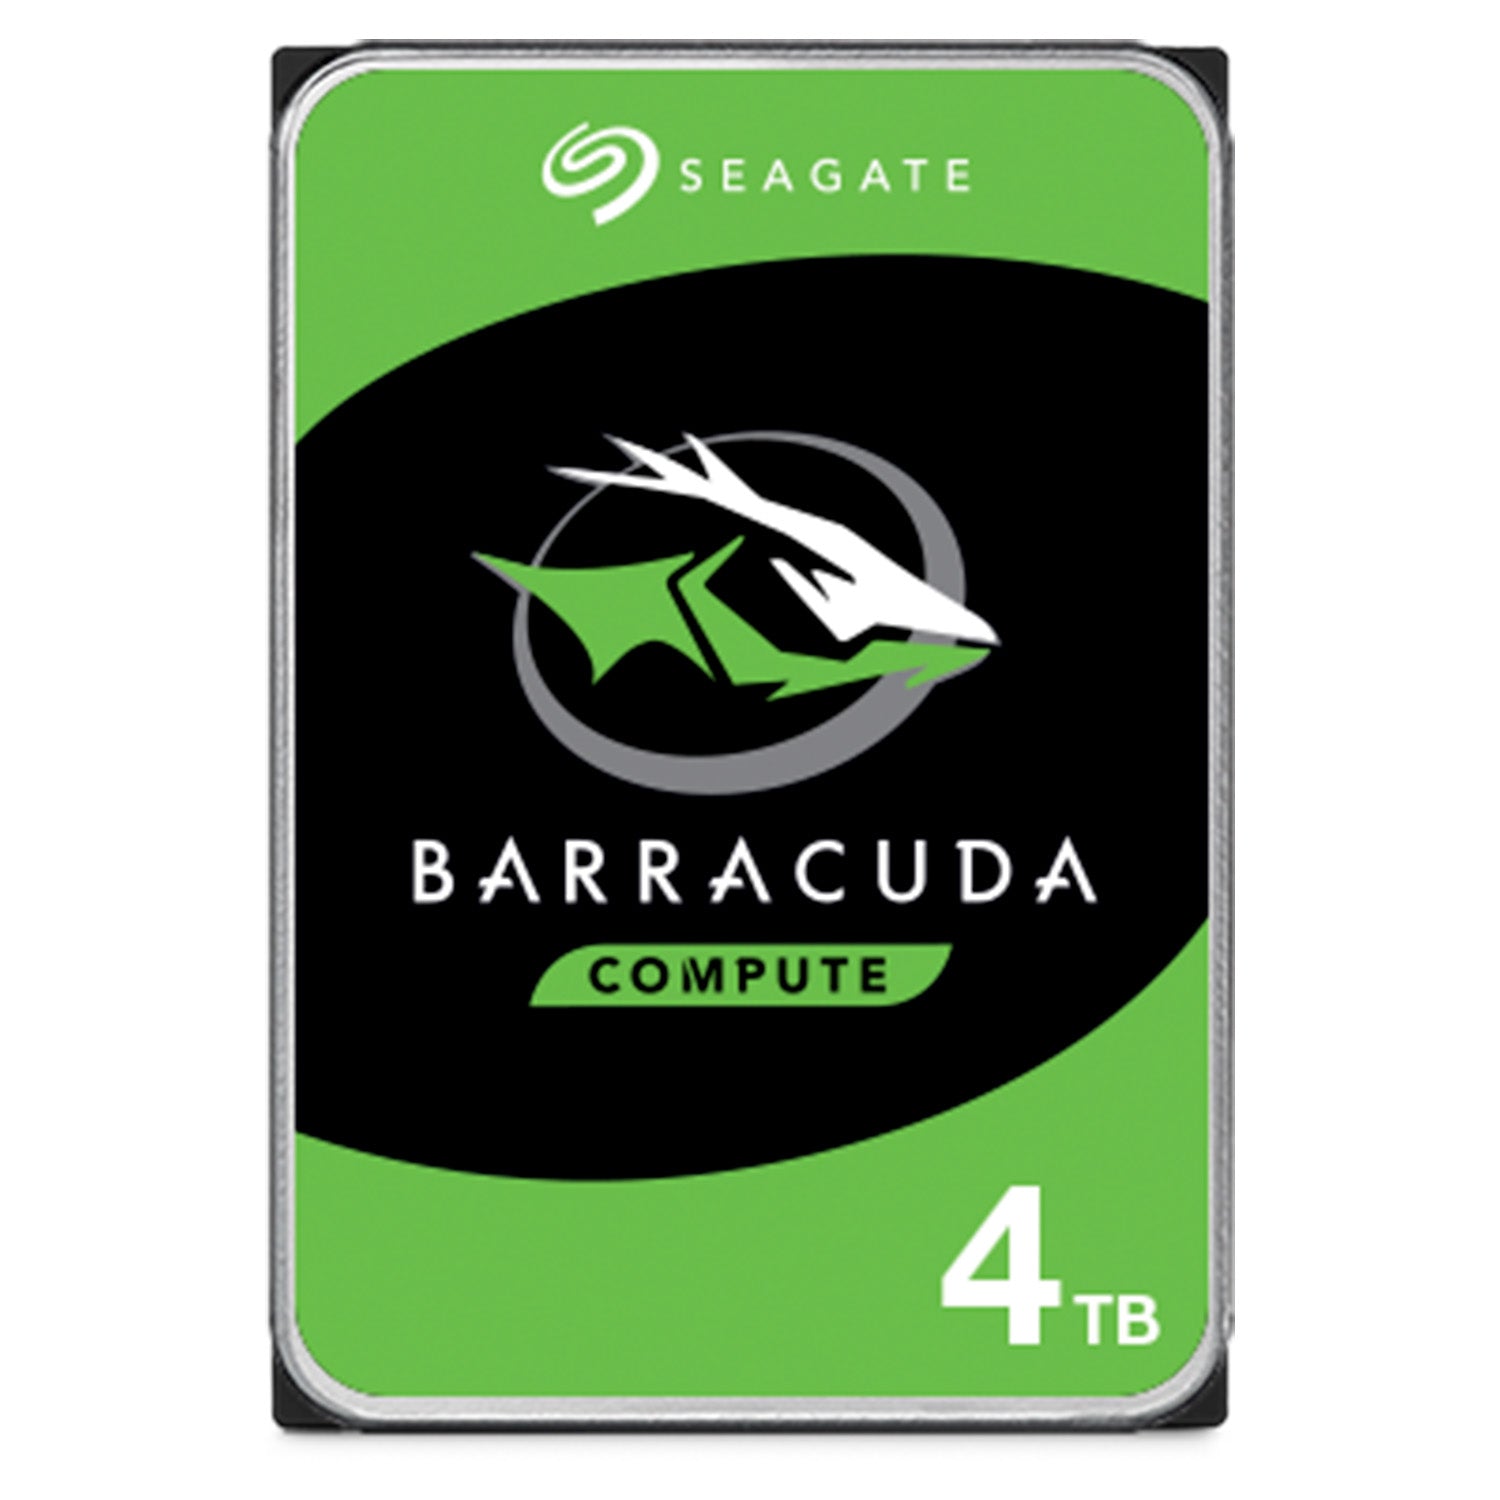 Seagate Barracuda 4TB Internal Hard Drive HDD (3.5 Inch) SATA 6 Gb/s 5400 RPM 256 MB Cache - High performance PC or Laptop Memory and Storage for IT Pros, Creators, Everyday Users (ST4000DM004)